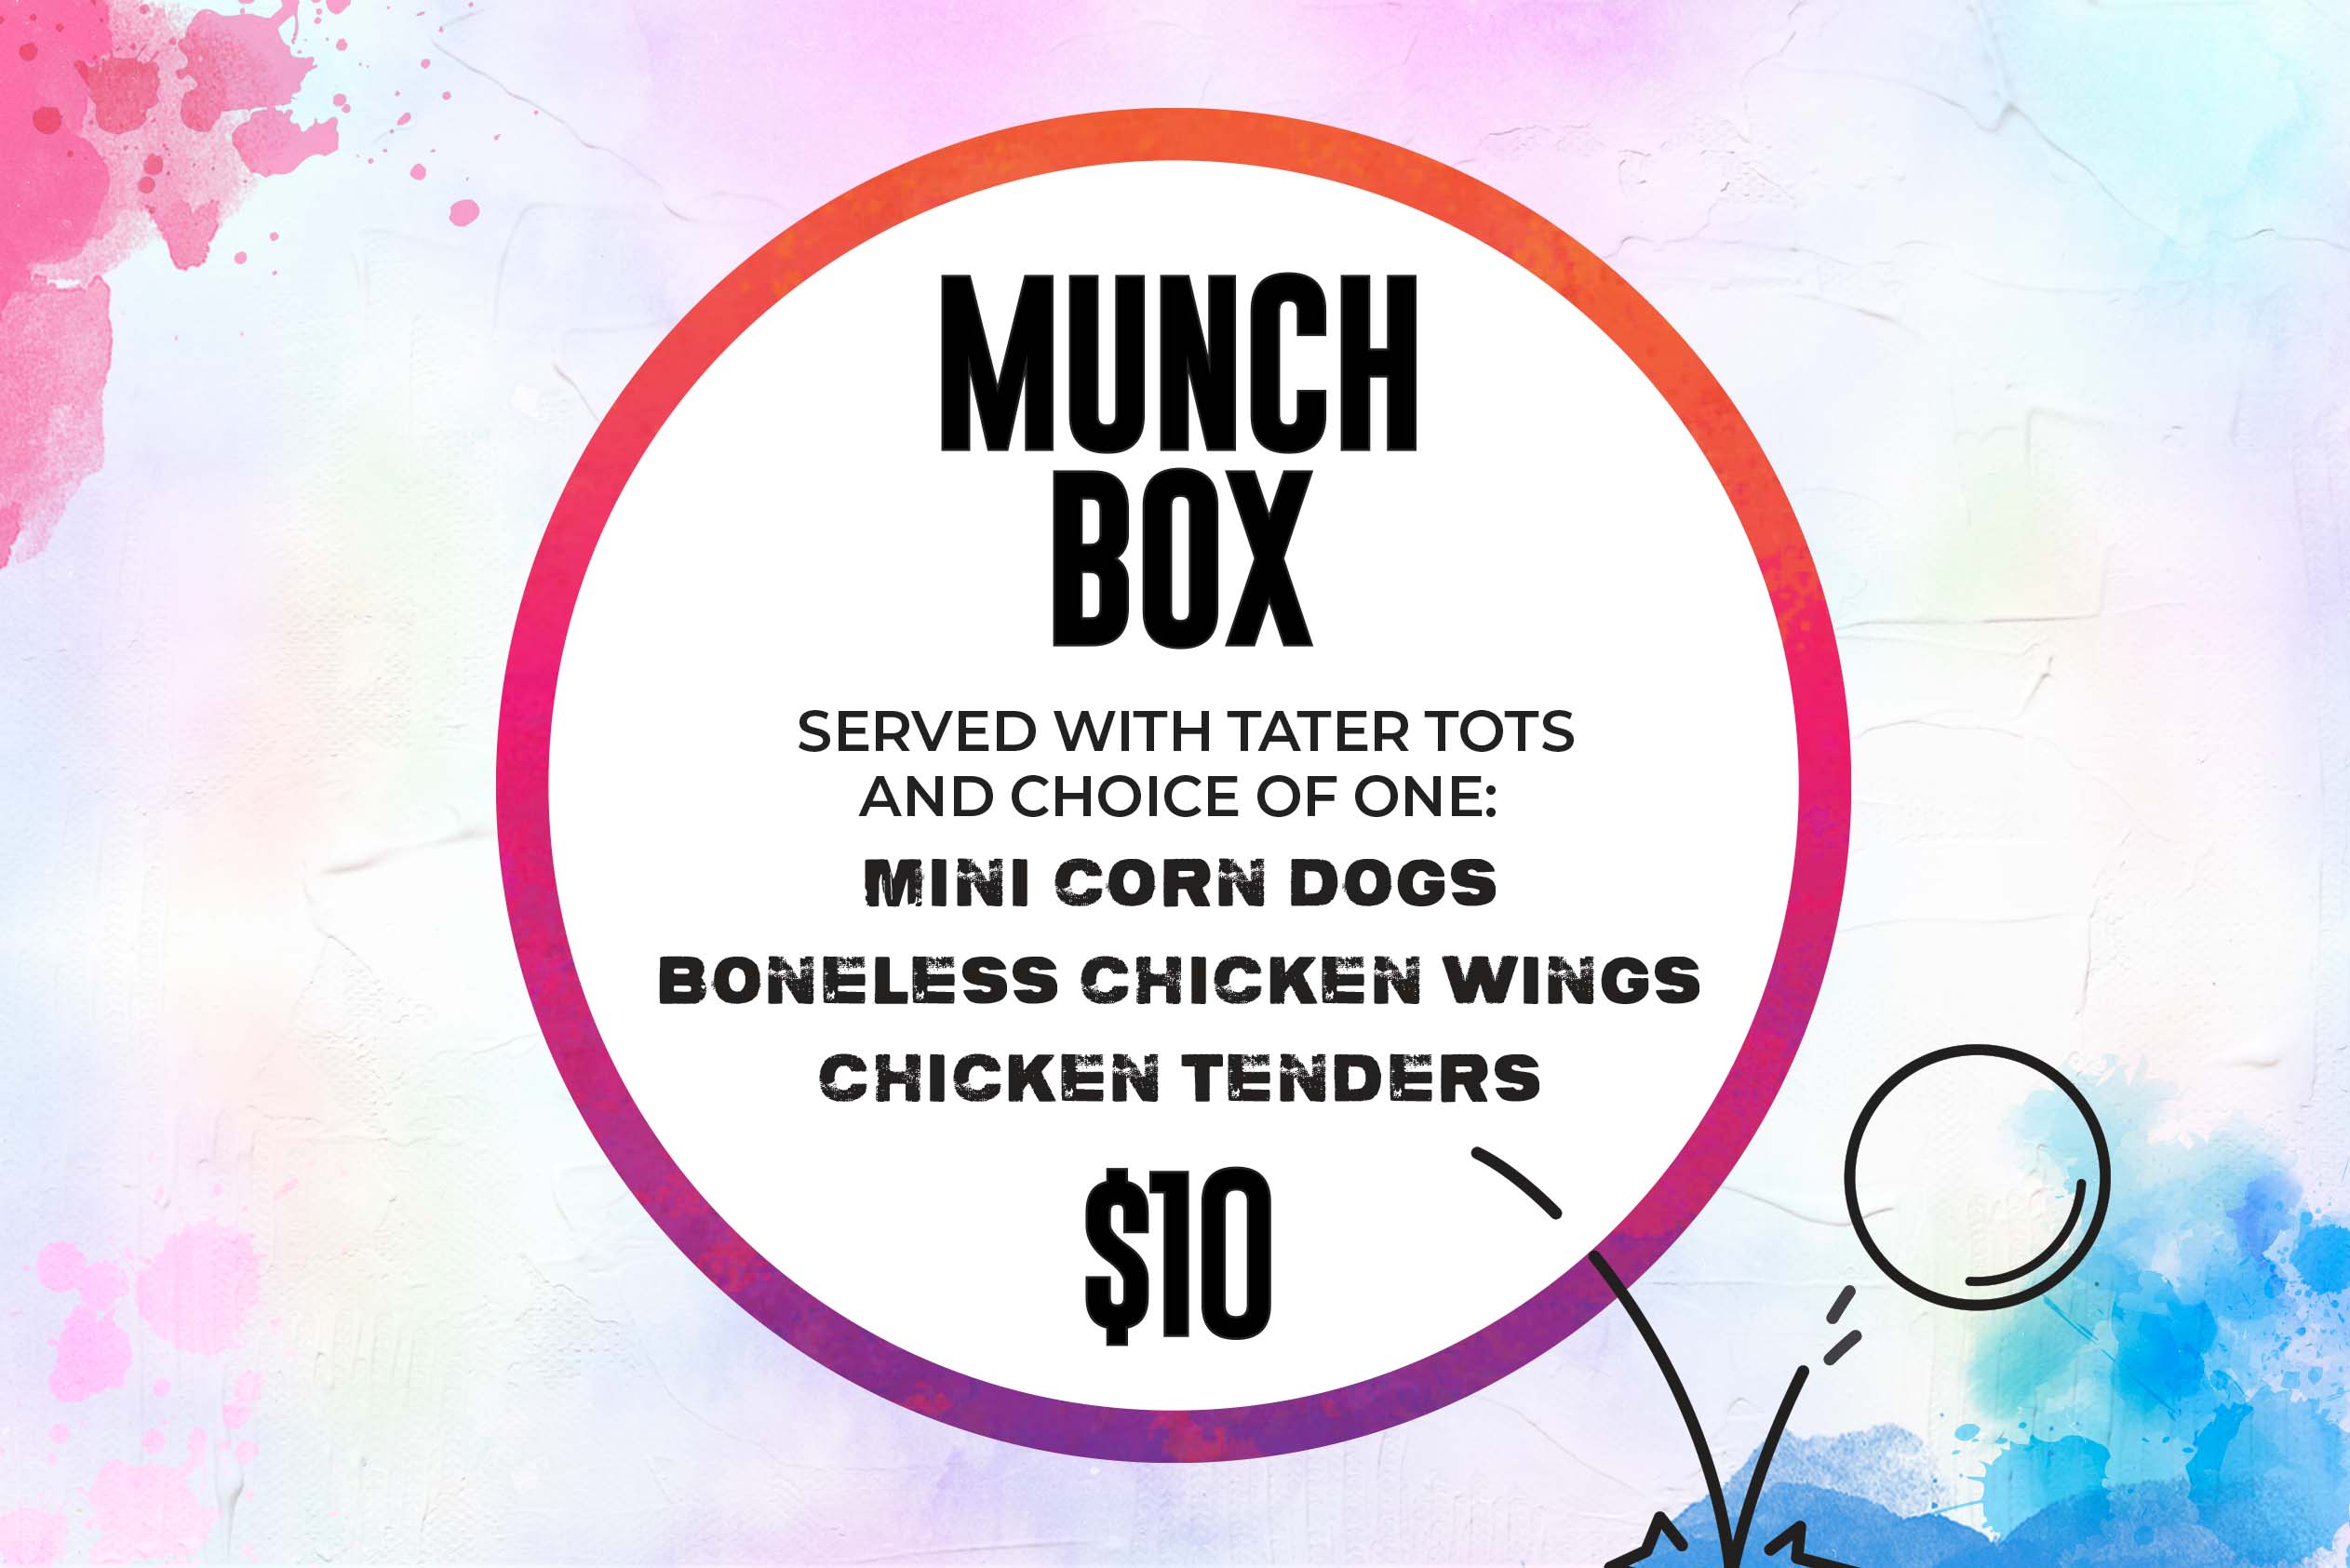 Munch Box served with tater tots and choice of mini corn dogs, boneless wings, or chicken tenders, $10